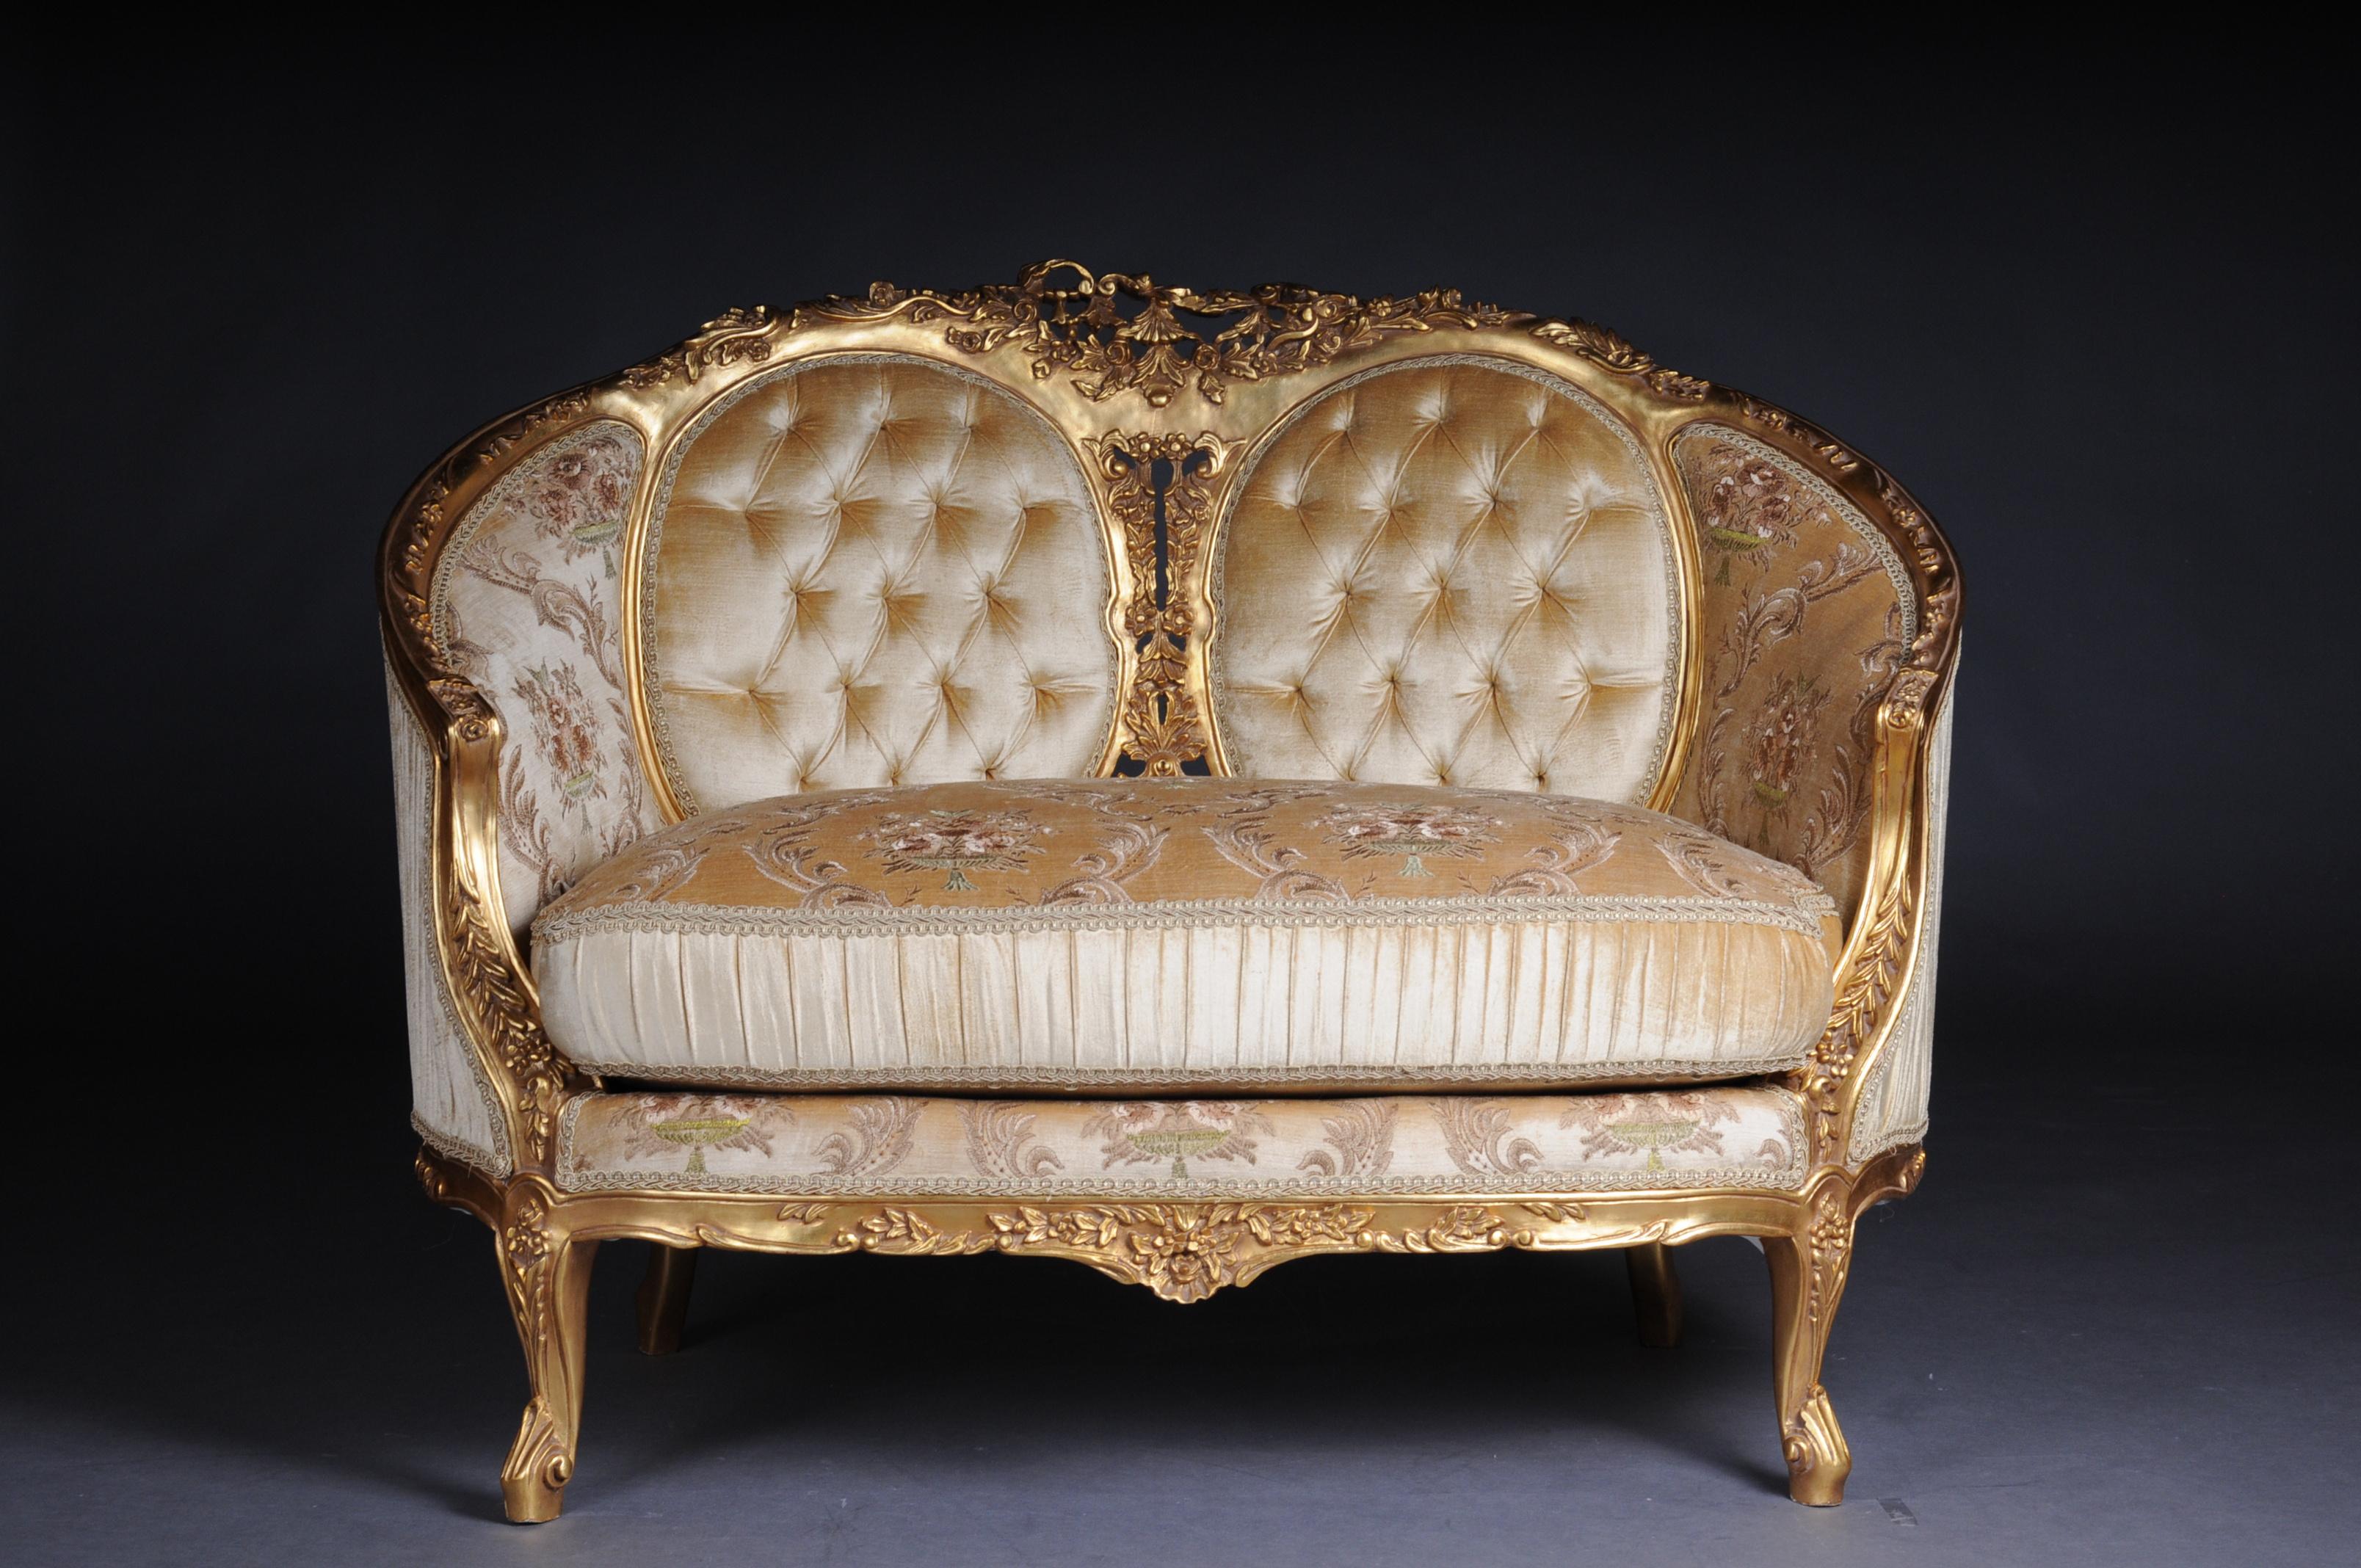 French Sofa, Canapé, Couch in Rococo or Louis XV Style (Louis XV.)